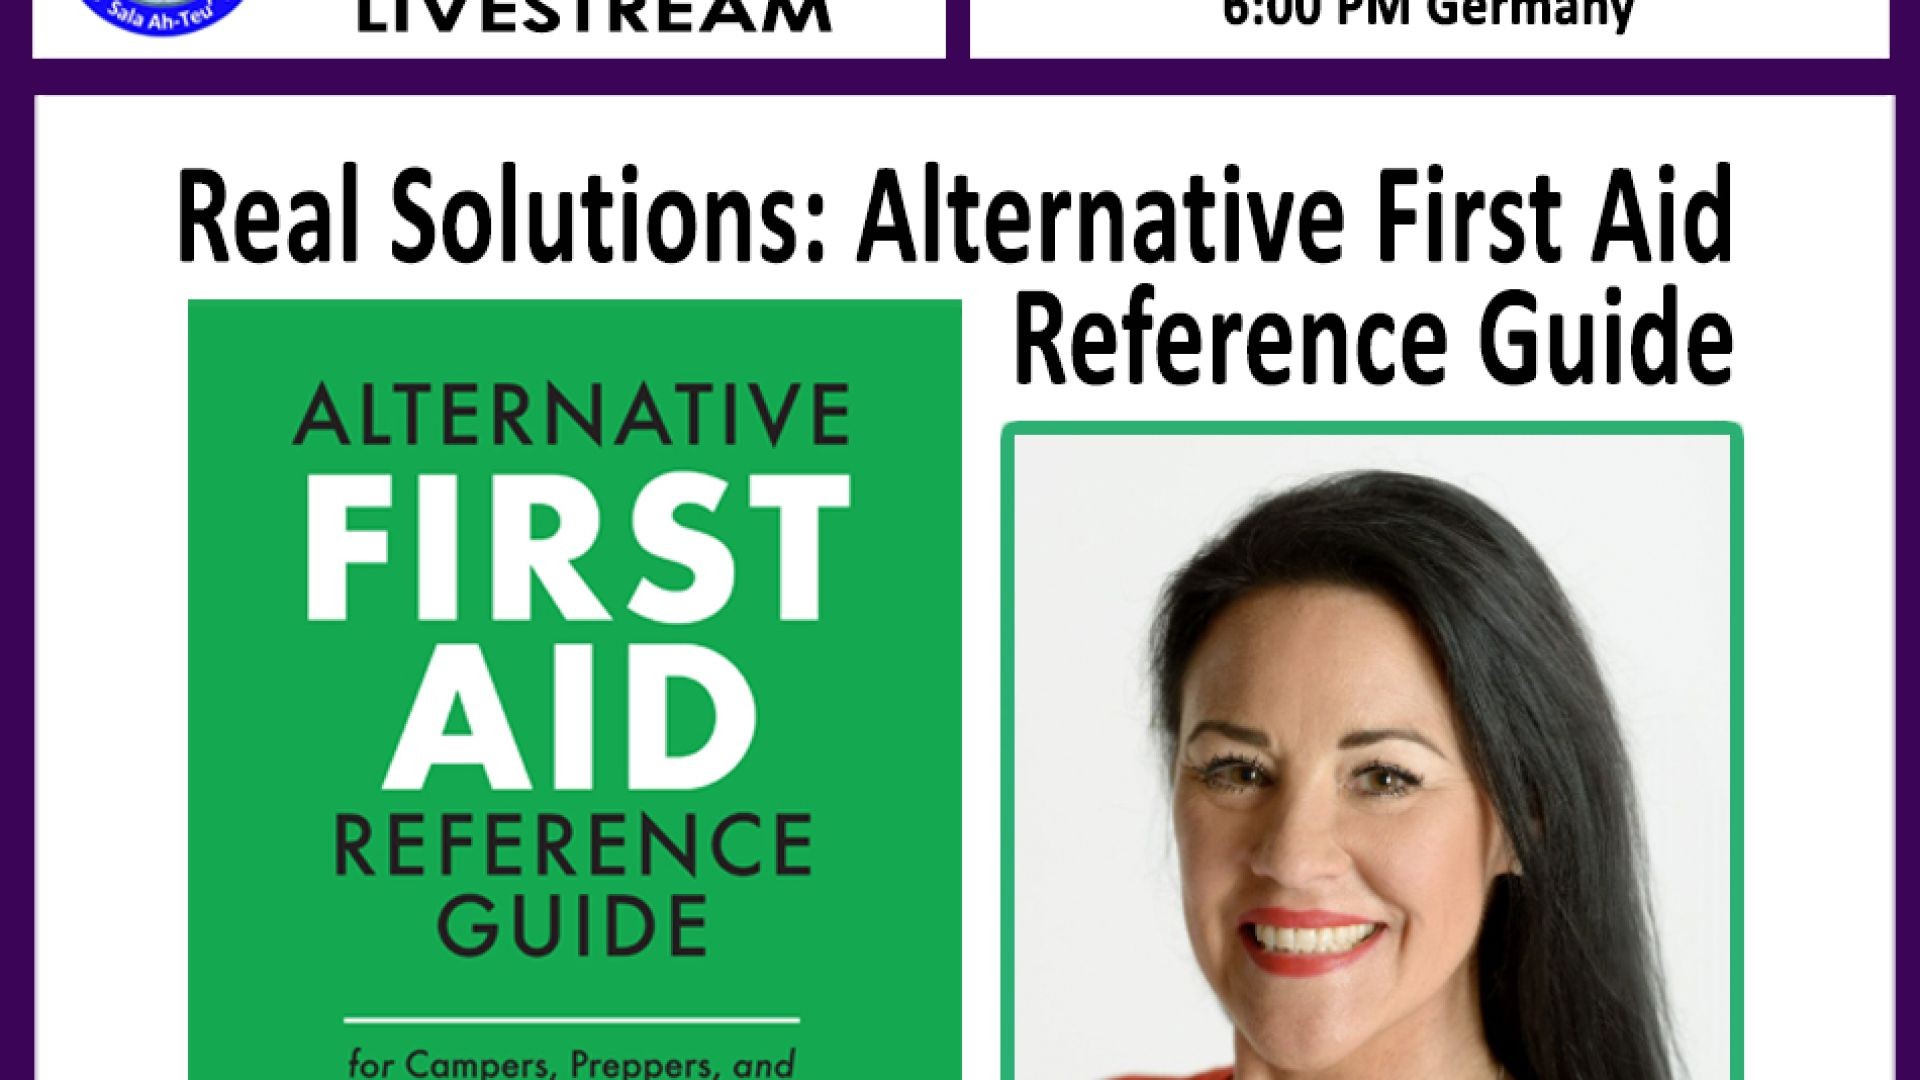 Kerri Rivera -"Real Solutions: Alternative First Aid Reference Guide"